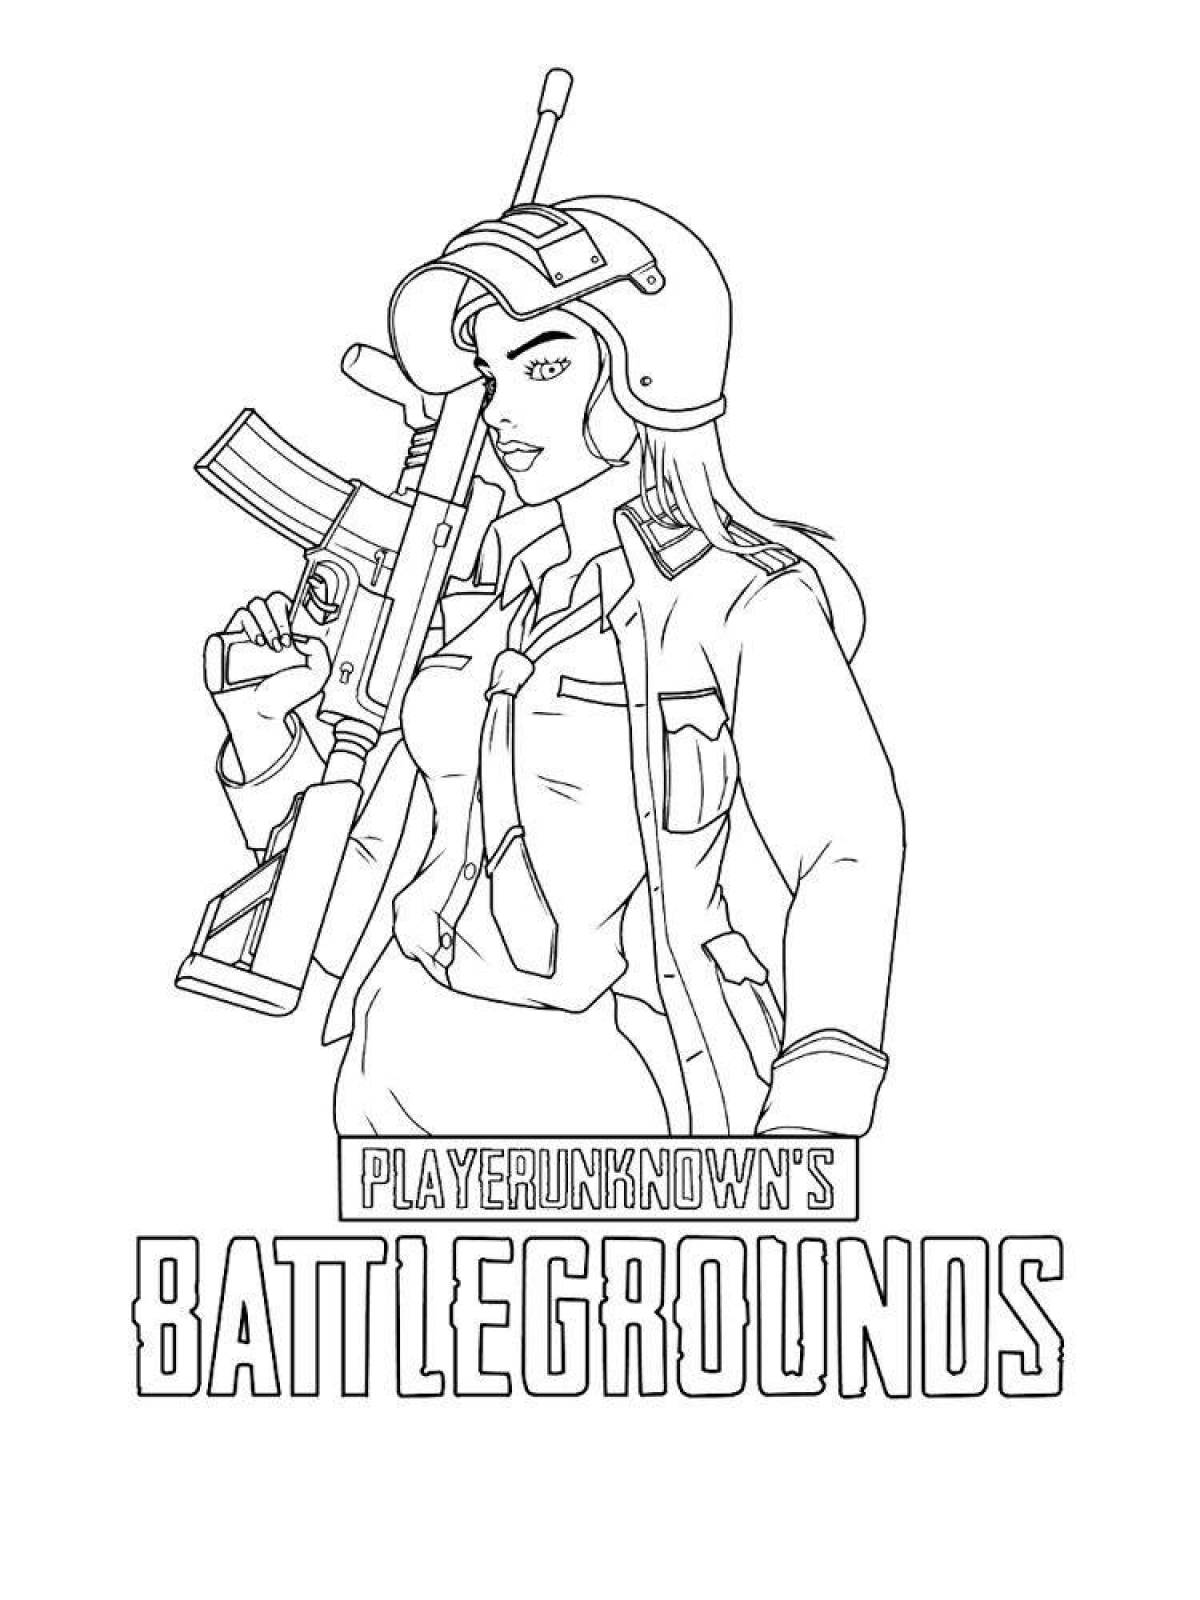 Colorful coloring page pubg mobile